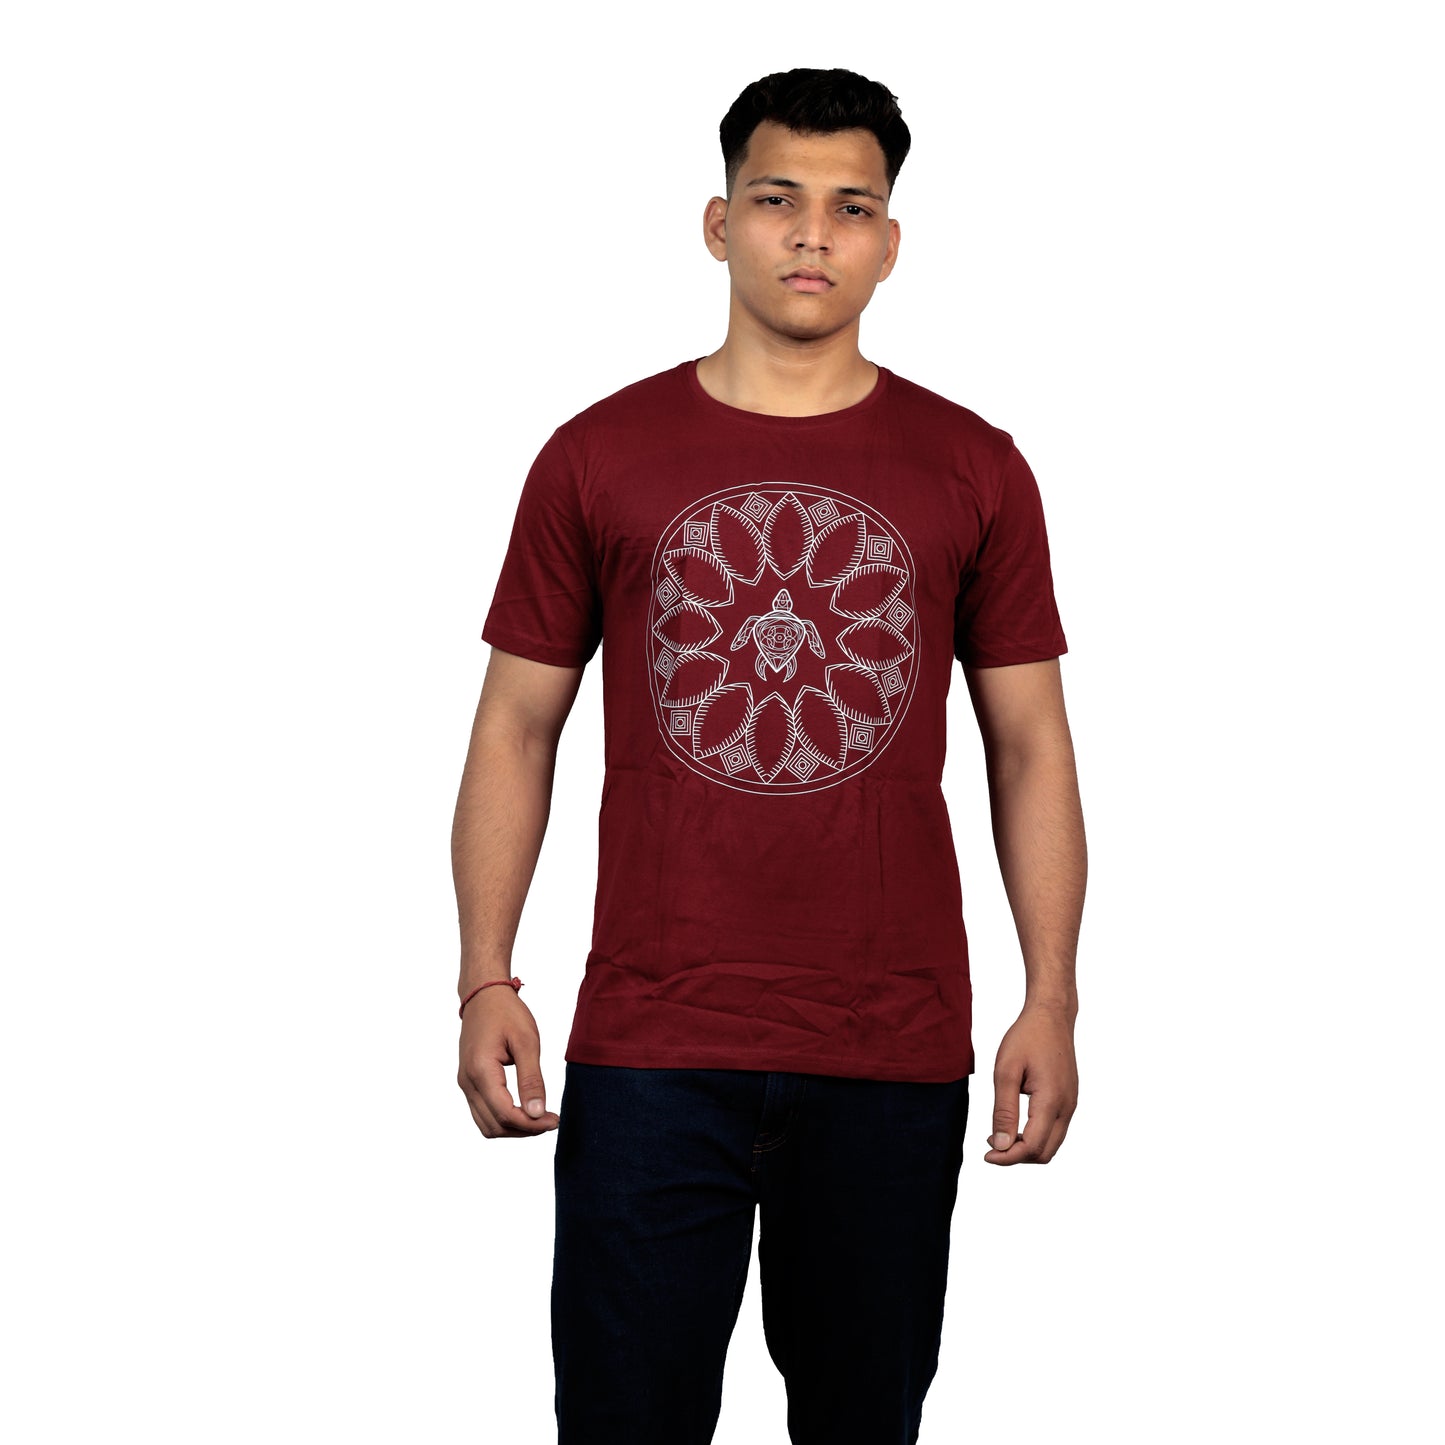 Nirvana Turtle -9  T-shirts In Maroon Color For Men